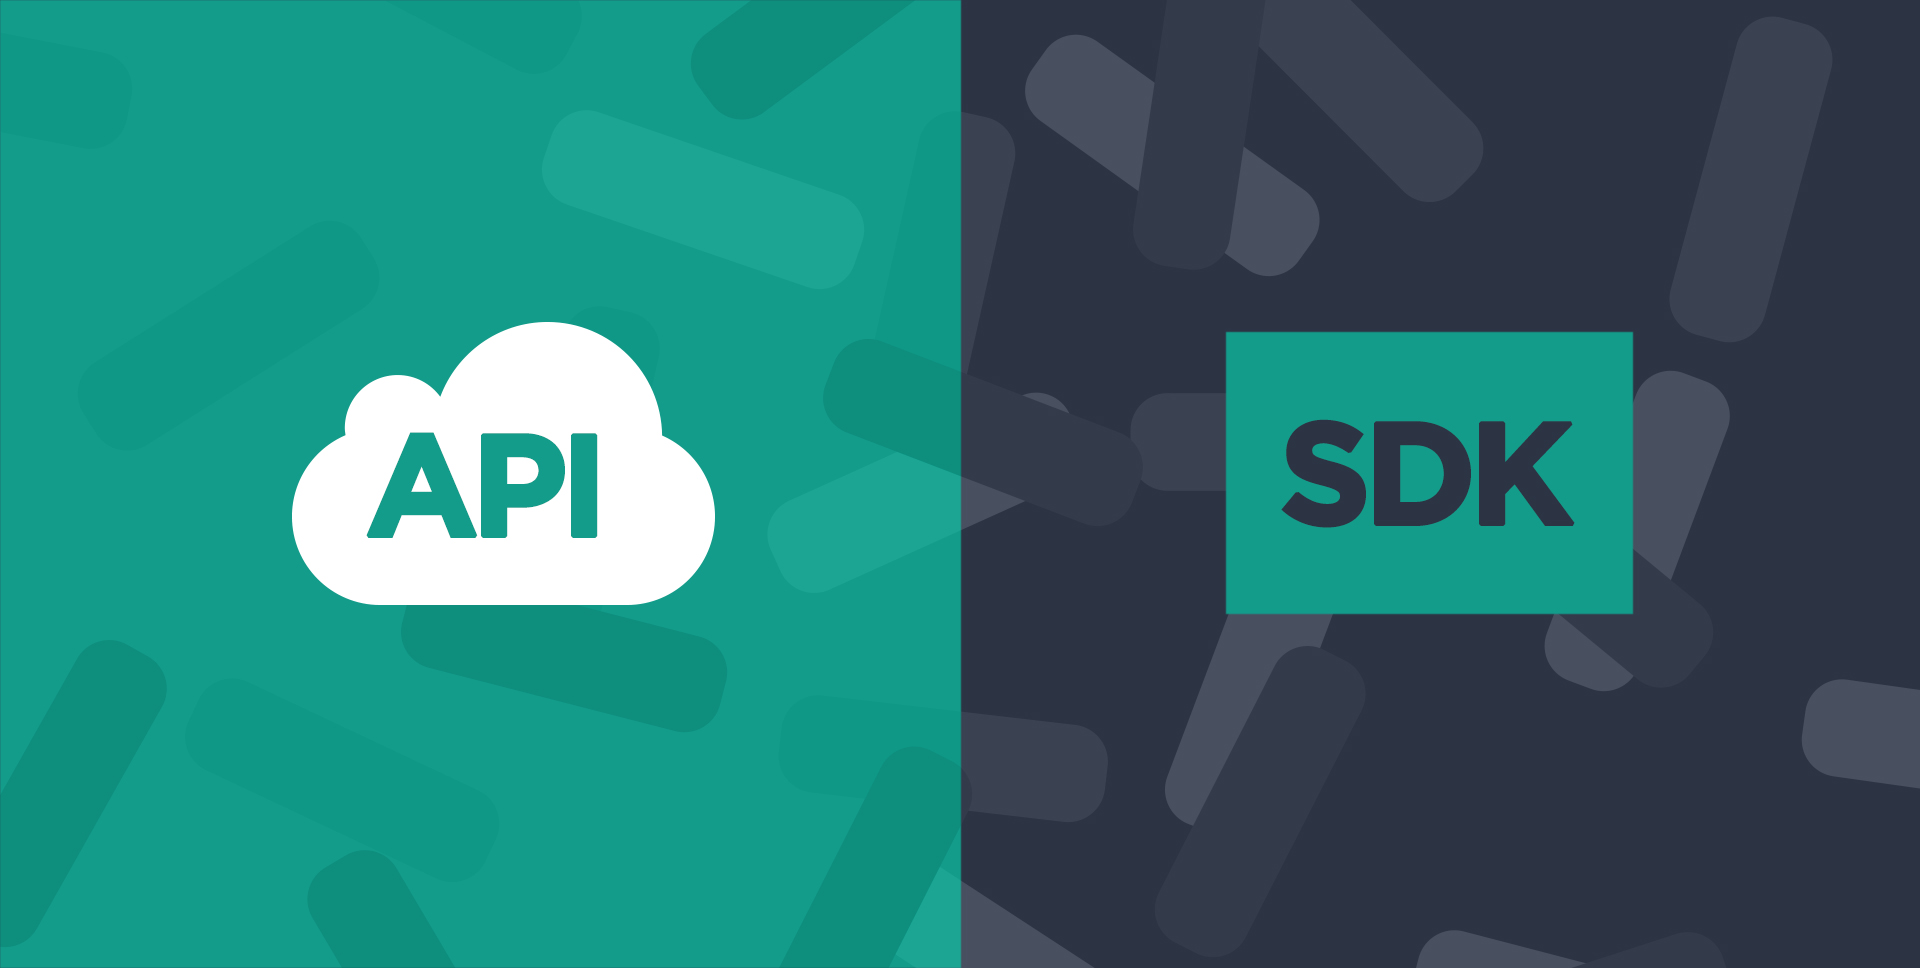 Illustration symbolizing the terms difference between 'API' and 'SDK'